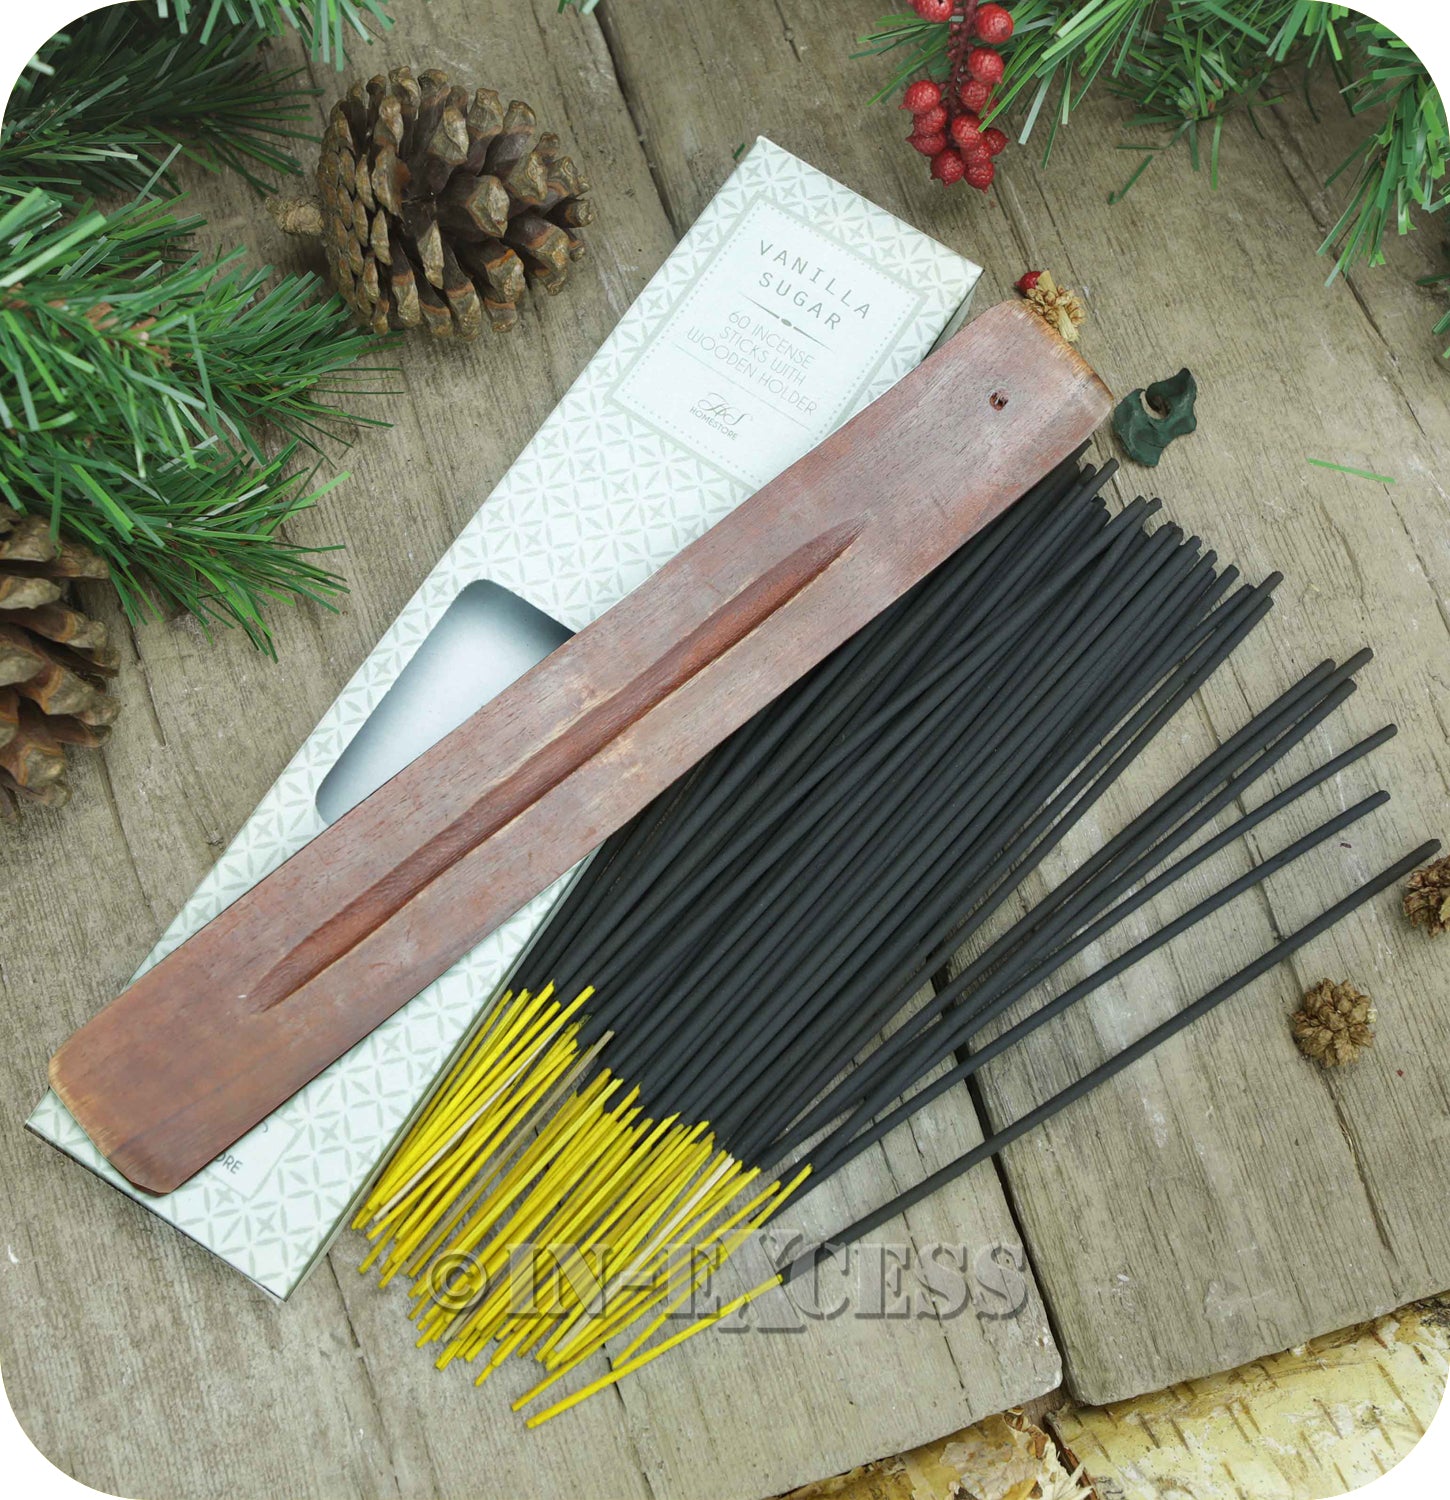 Fragranced Room Aroma Incense Sticks With Wooden Holder Vanilla Sugar - Pack of 60 Pieces